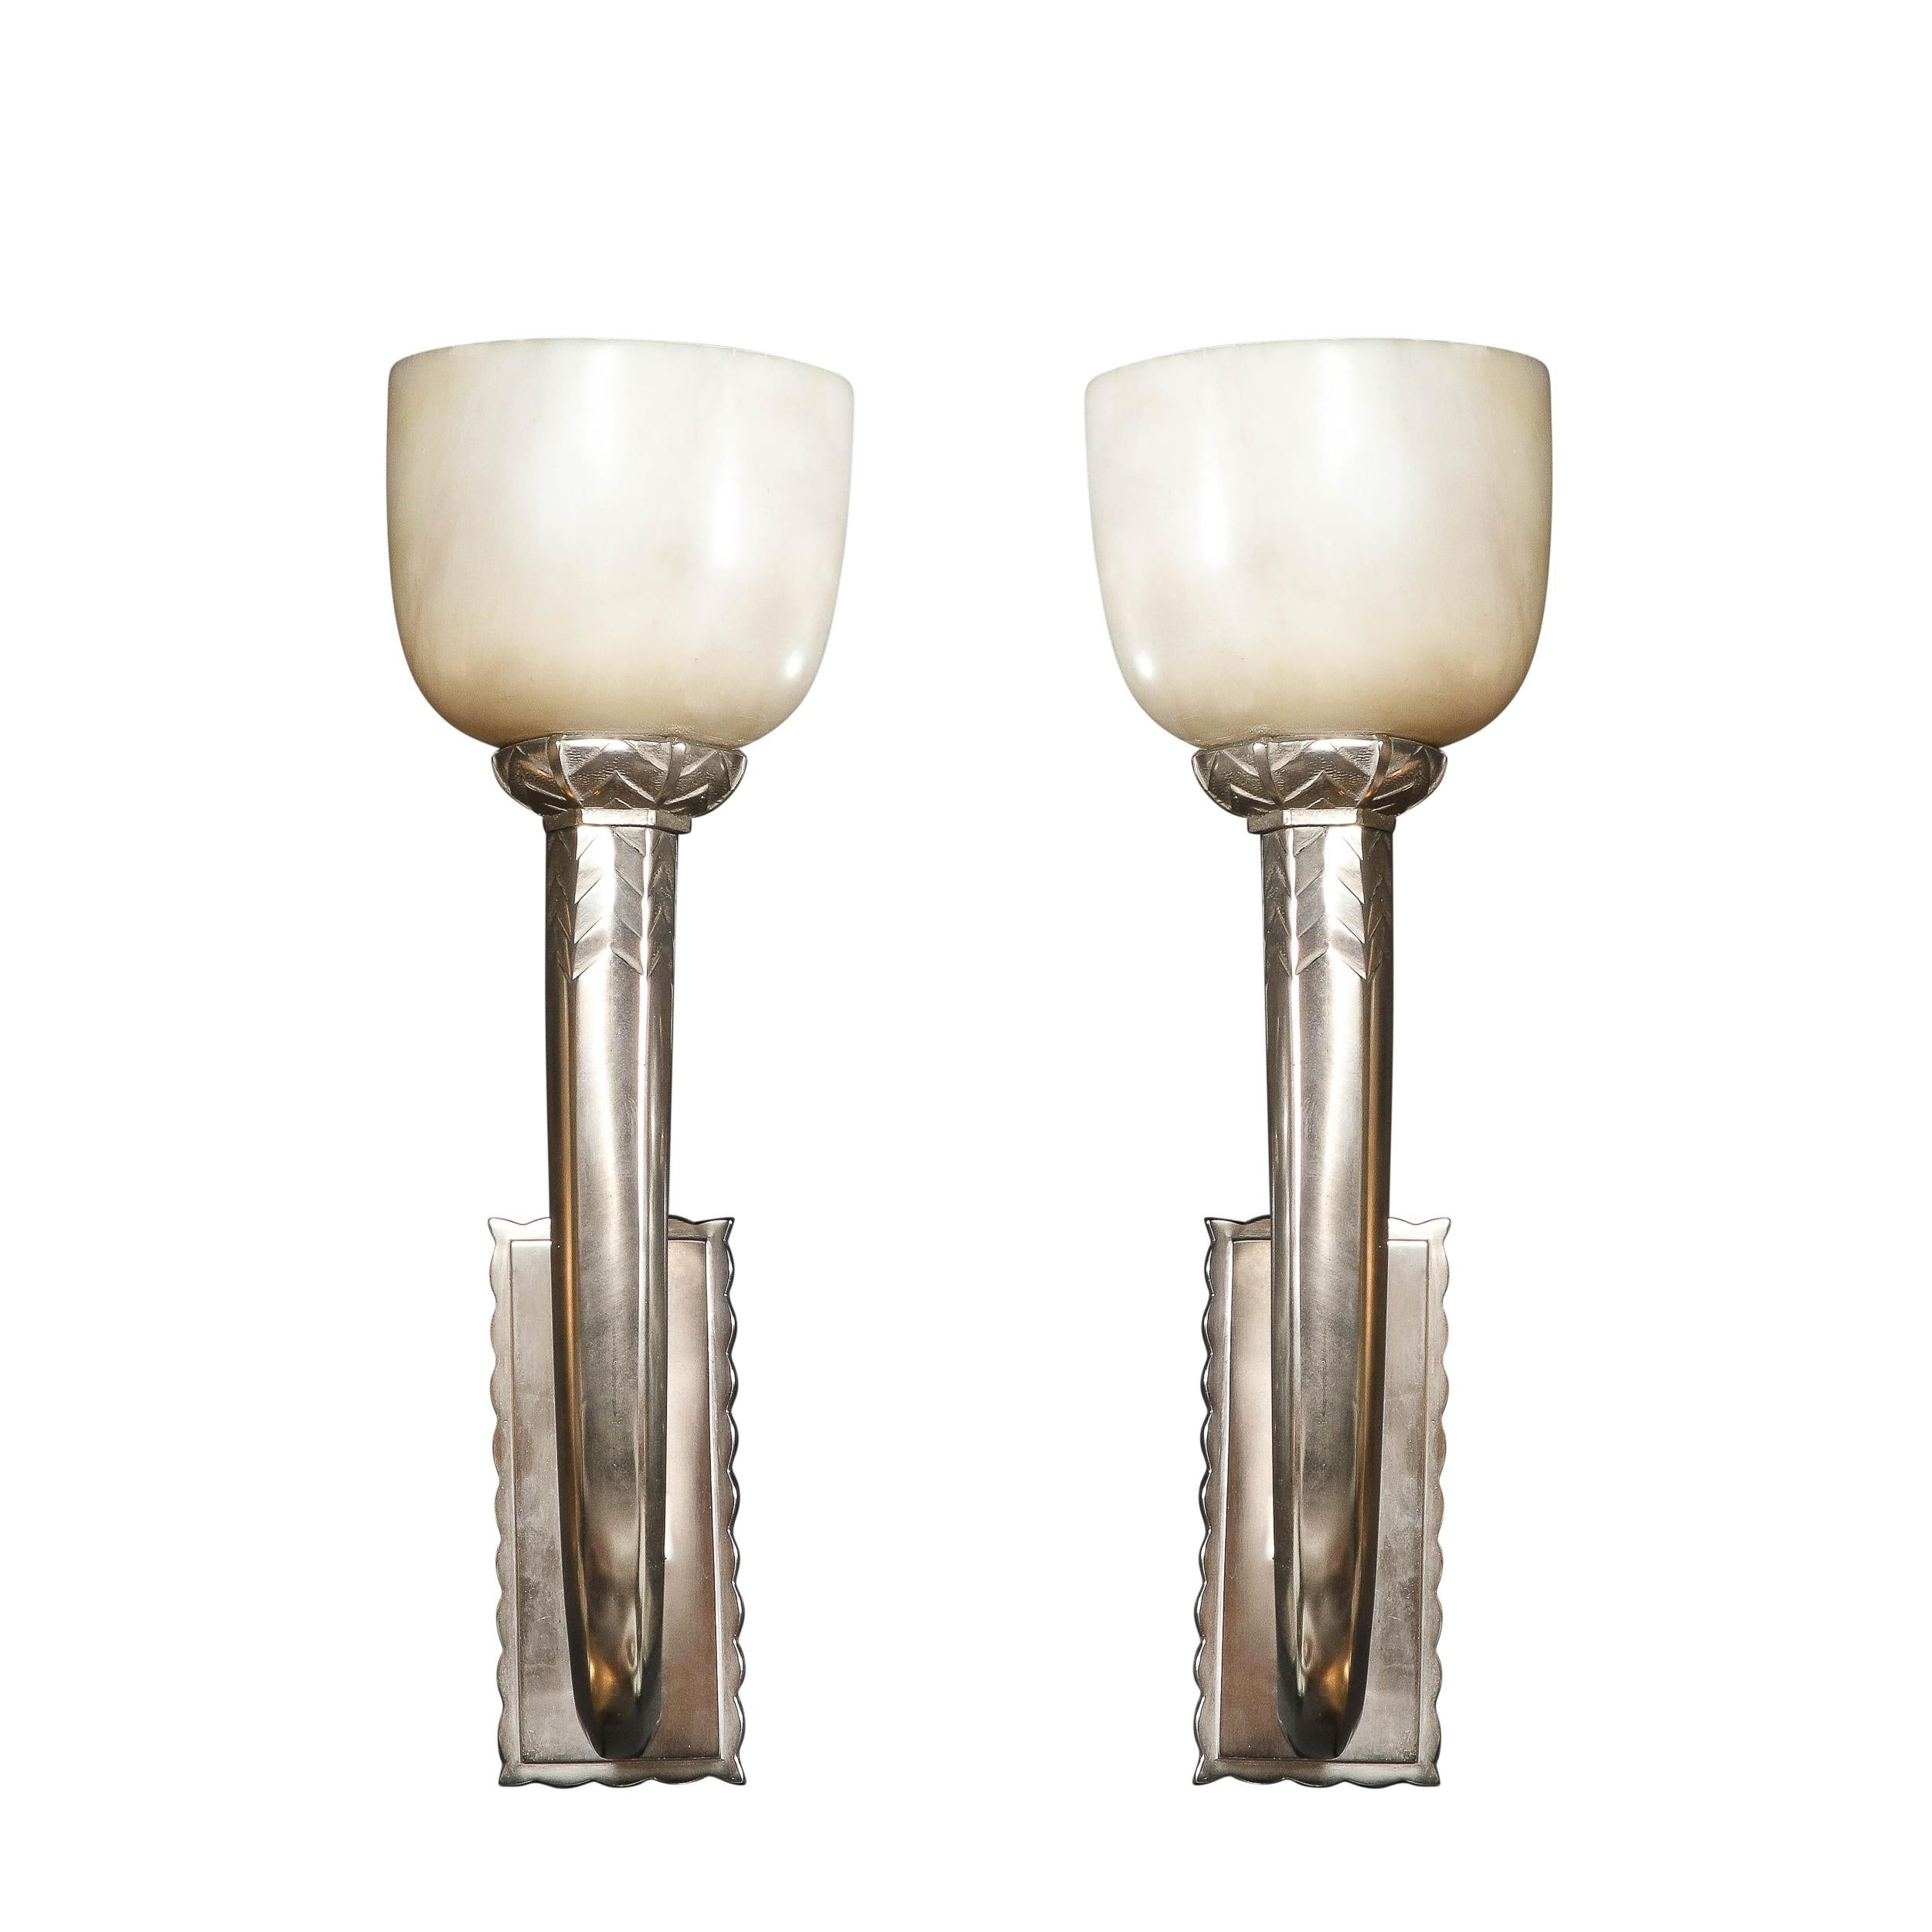 This elegant and balanced Pair of Art Deco Skyscraper Style Silvered Bronze and Alabaster Sconces originate from France, Circa 1935. They feature silvered bronze frames in a classic composition adorned with stylized geometric skyscraper detailing.